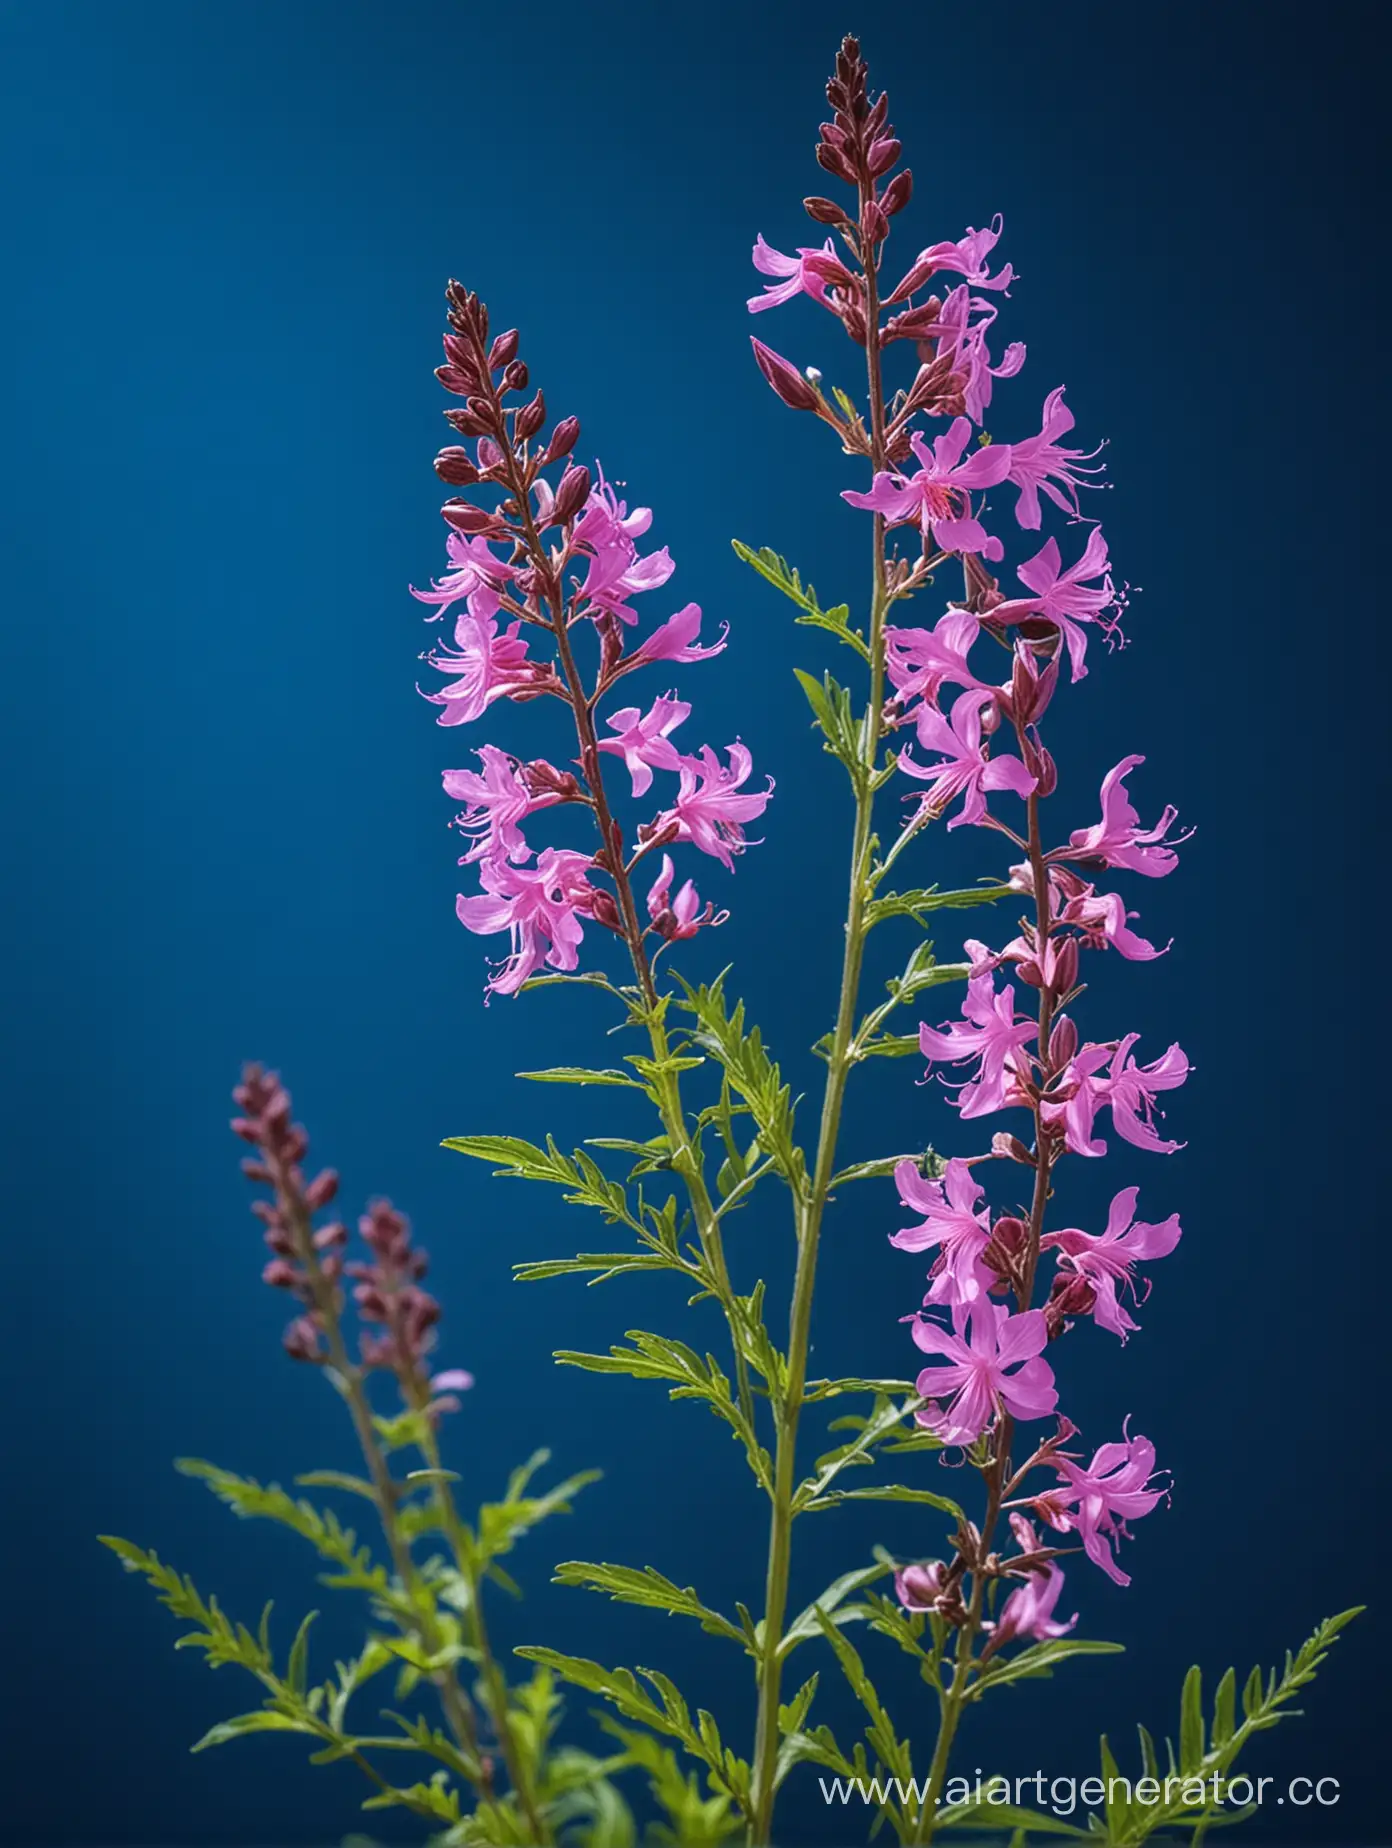 Vibrant-Fireweed-Wild-Blue-Flower-Blossoming-Against-Azure-Sky